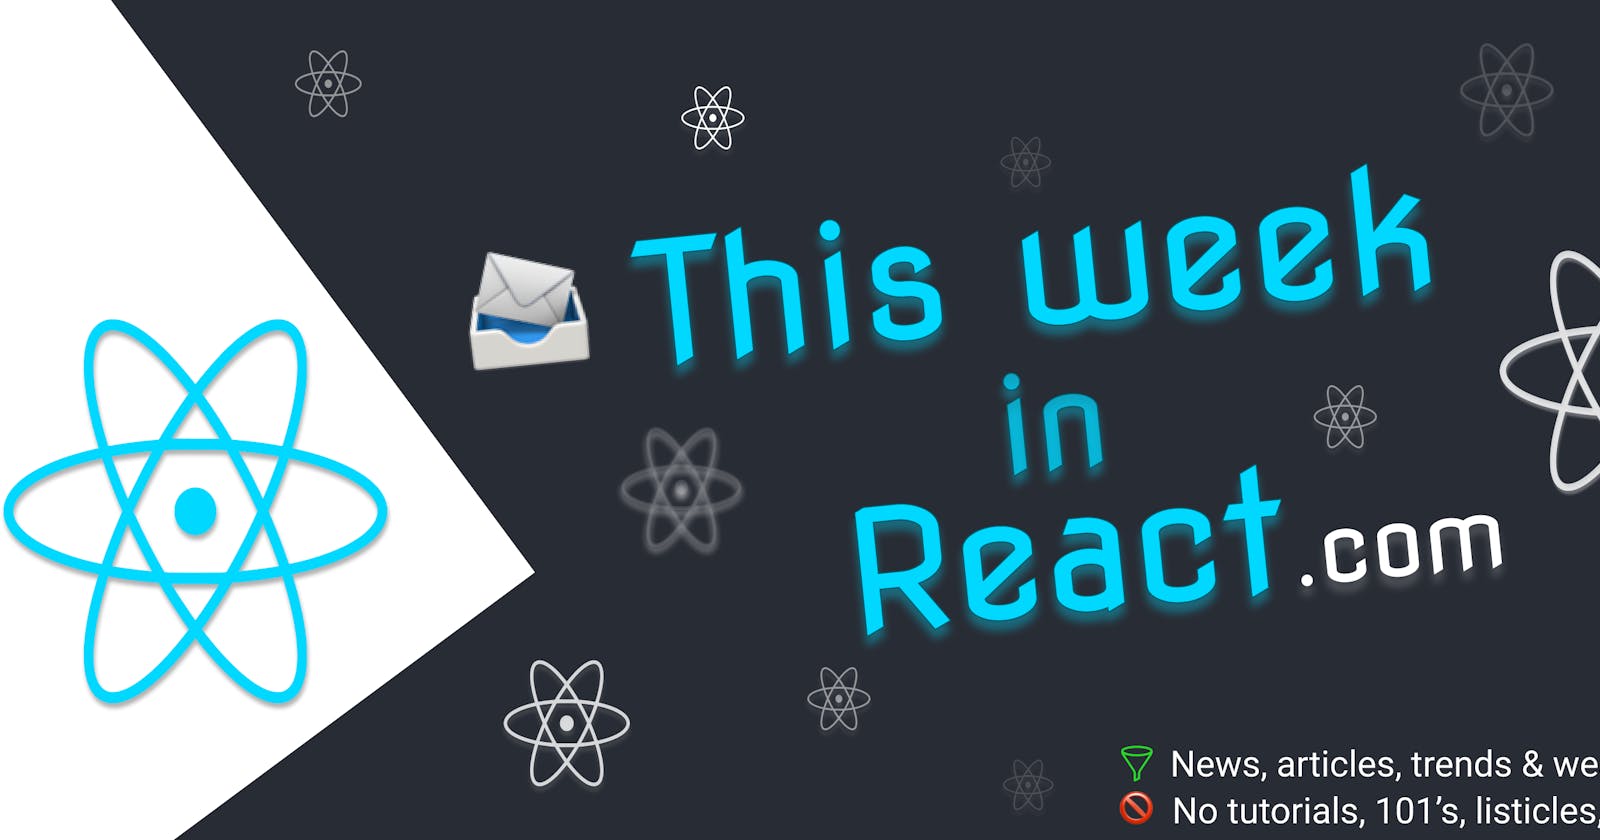 This Week In React  #163: React-Query, React-Forget, Rspress, Remix Vite, Next.js Barrels, Storybook, Memo, Transitions, Gluestack, VisionCamera...